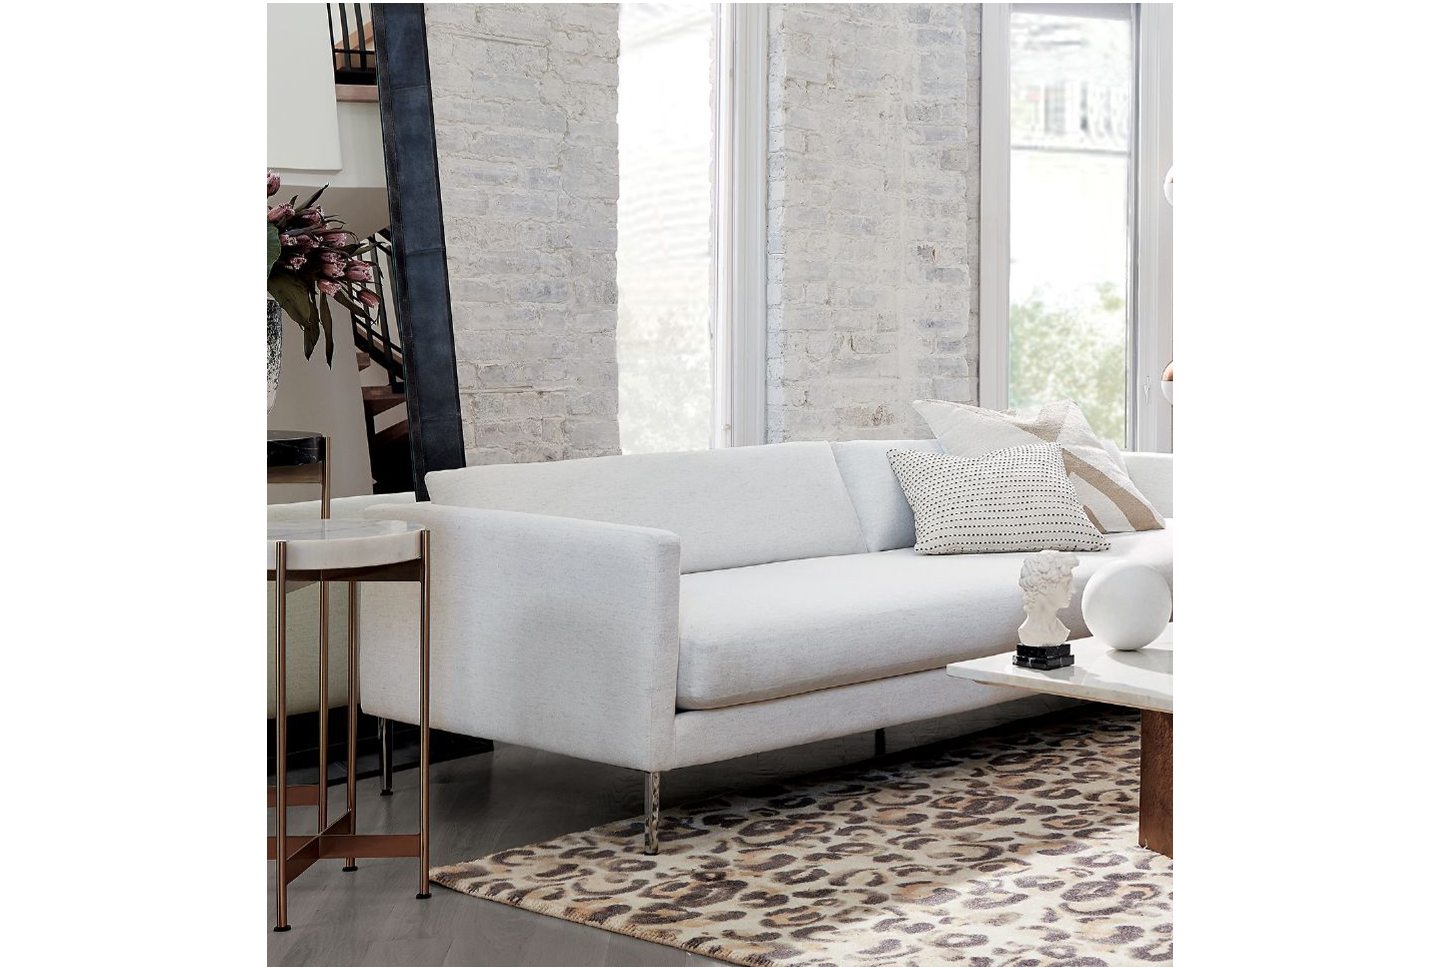 MAJOR UPDATES FALL FURNITURE SALE UP TO 30% OFF**